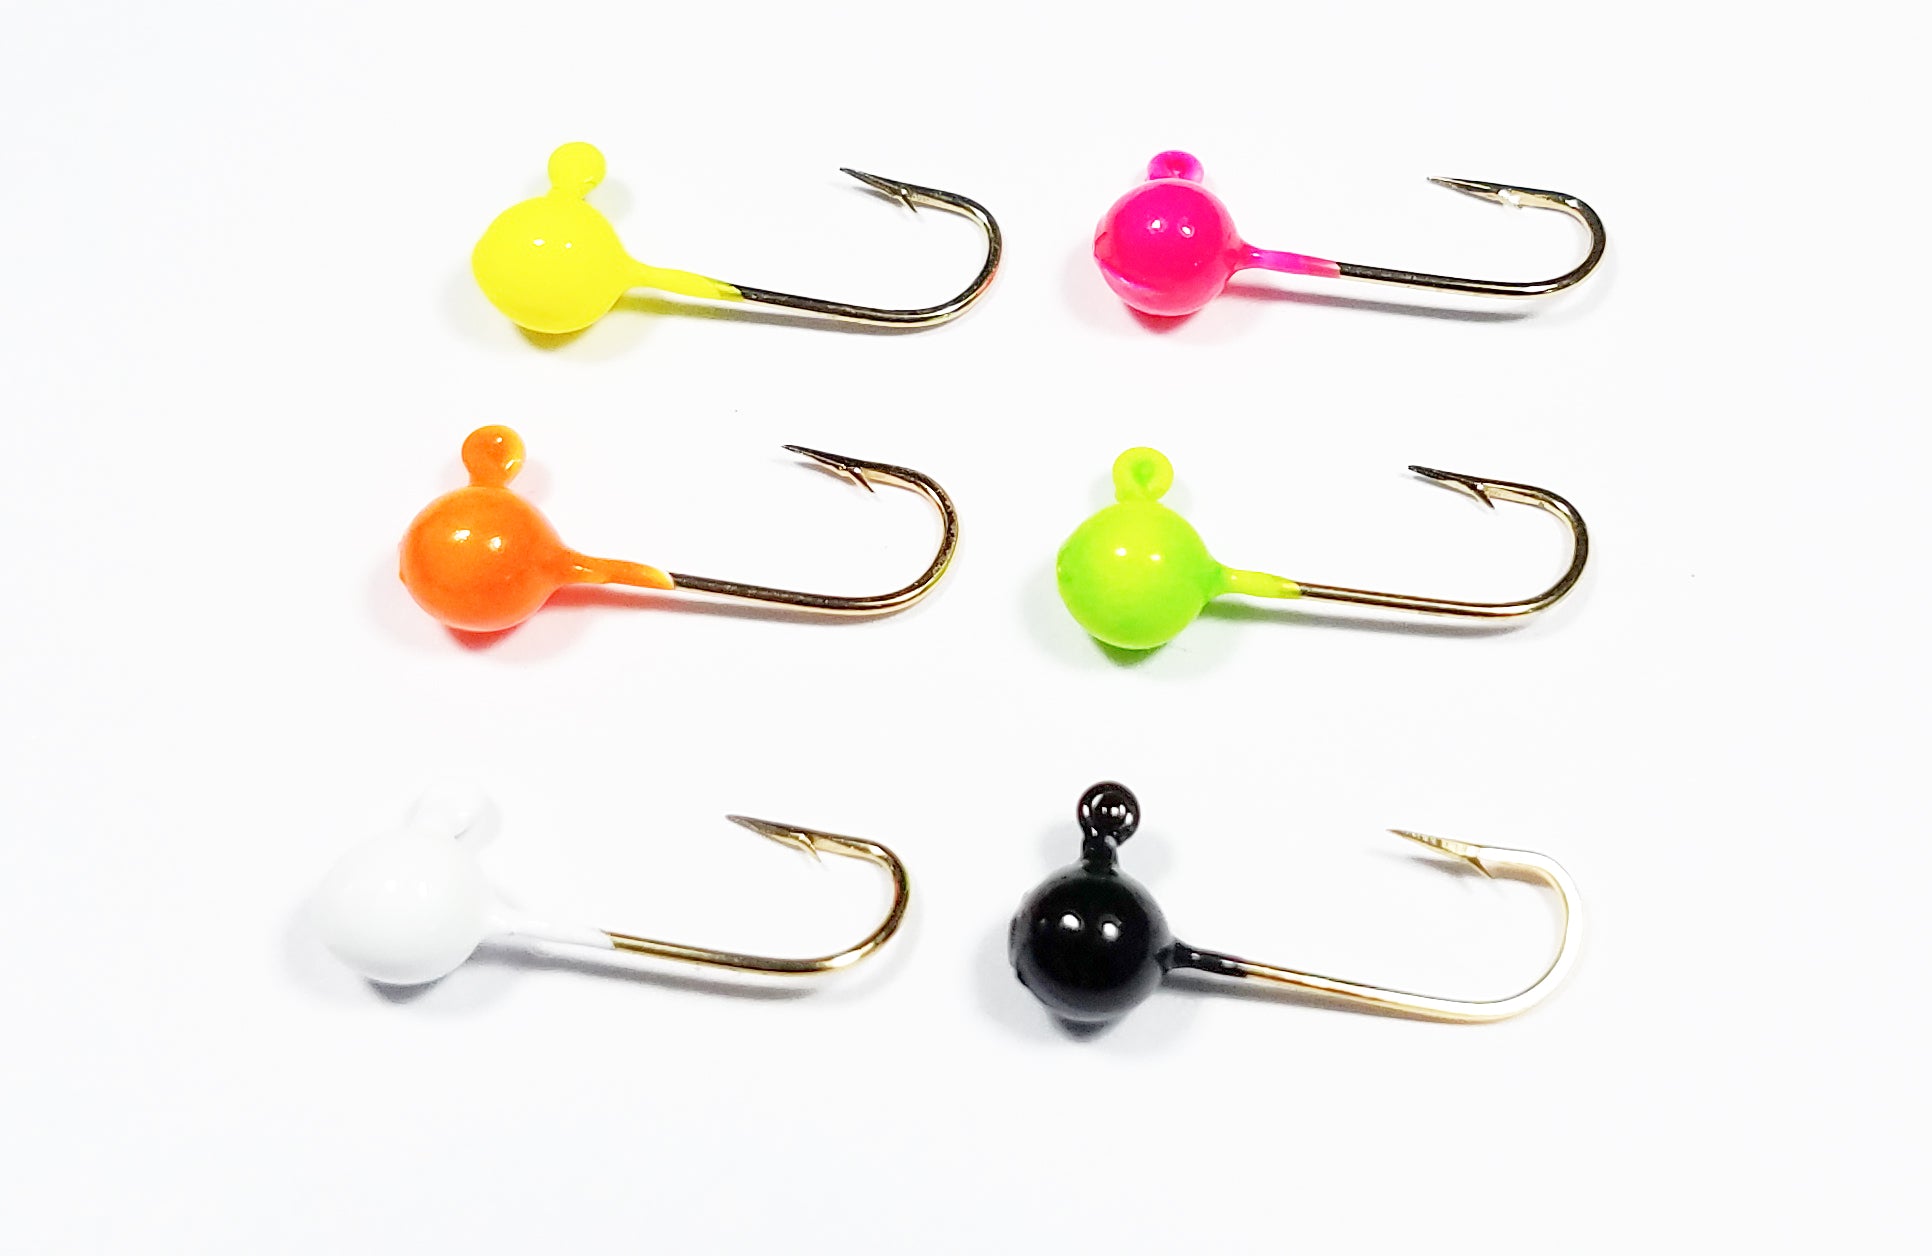 1/32 oz Jig Heads Round Ball No Collars Hook Options! MADE IN USA